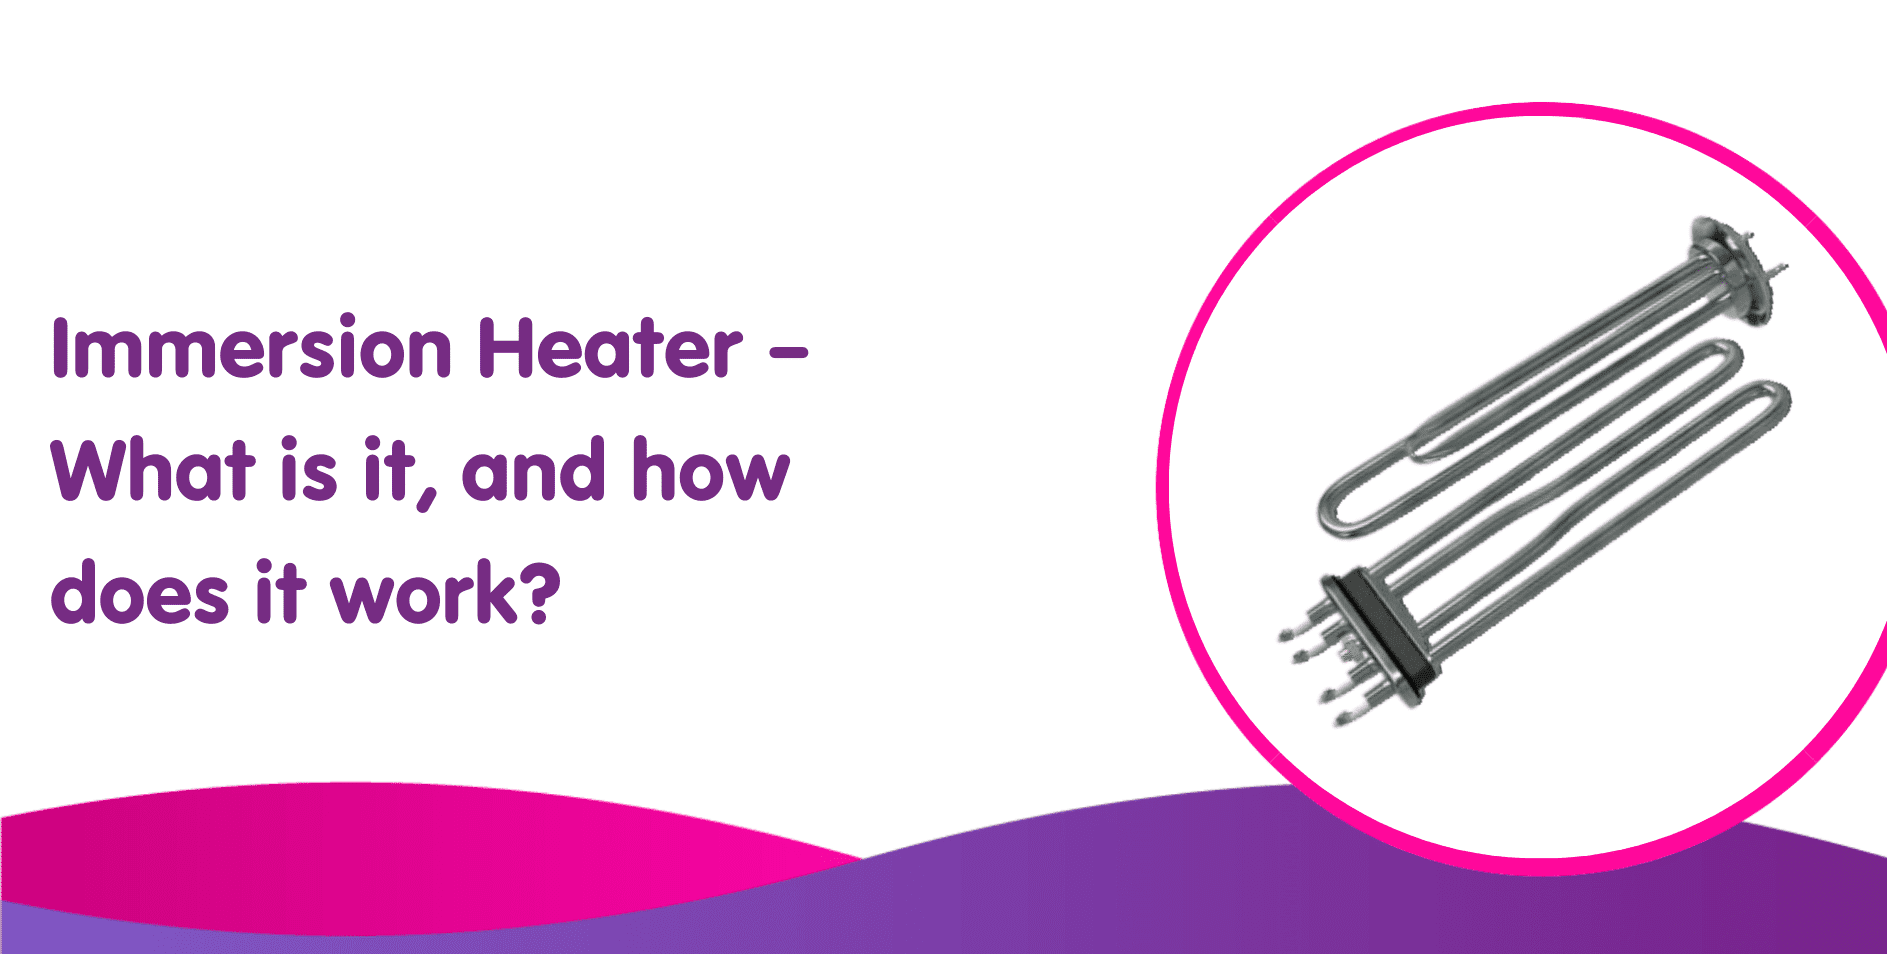 Immersion Heater – What is it, and how does it work?